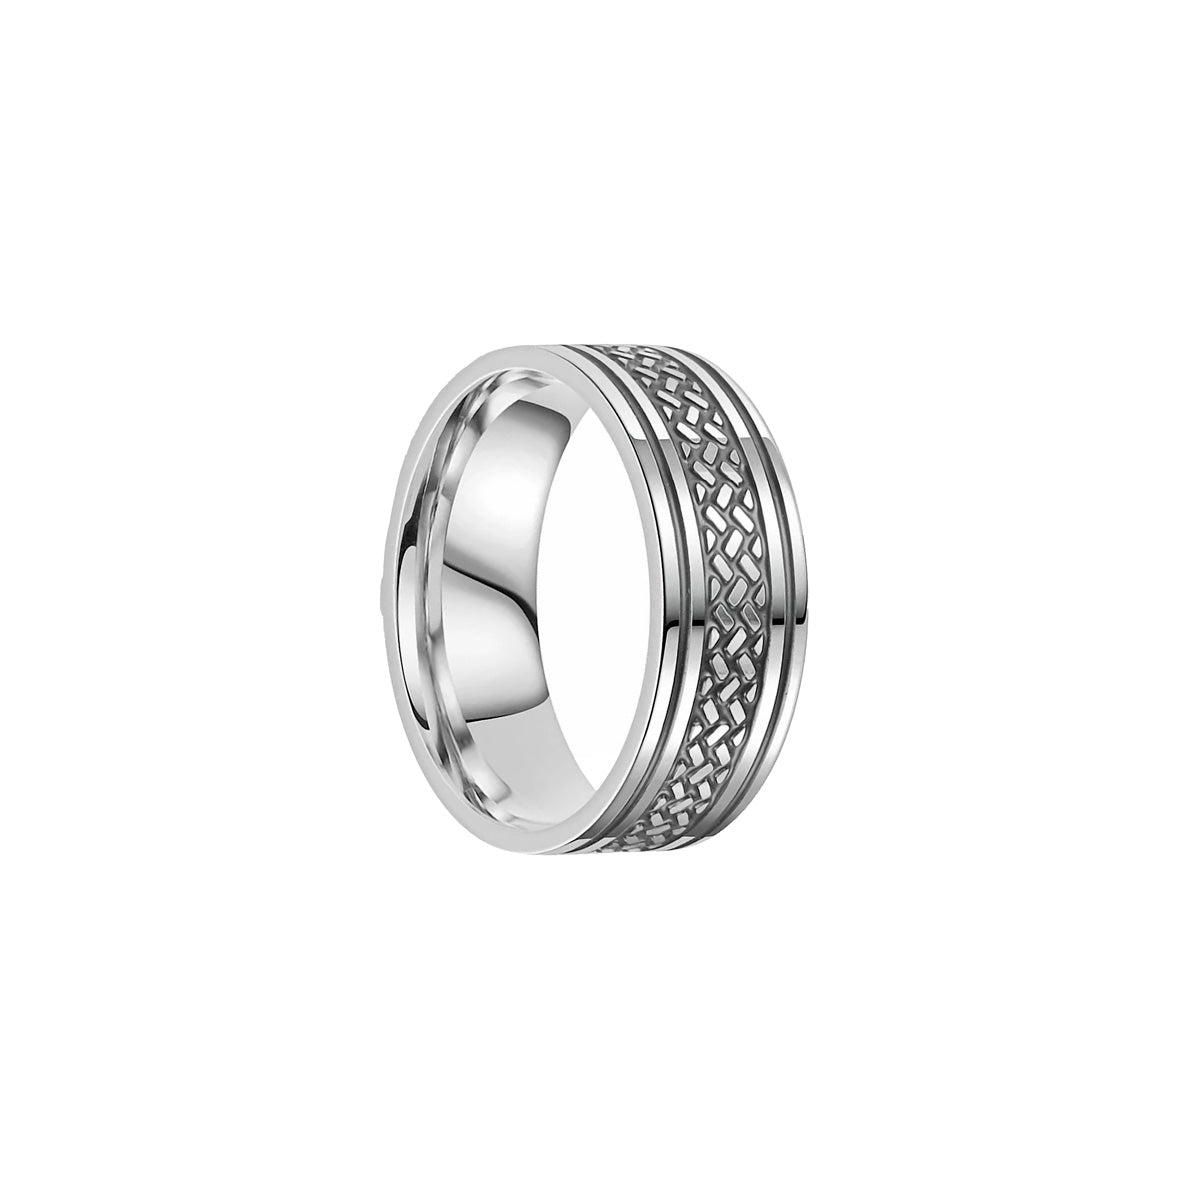 Patterned shiny steel ring 8mm